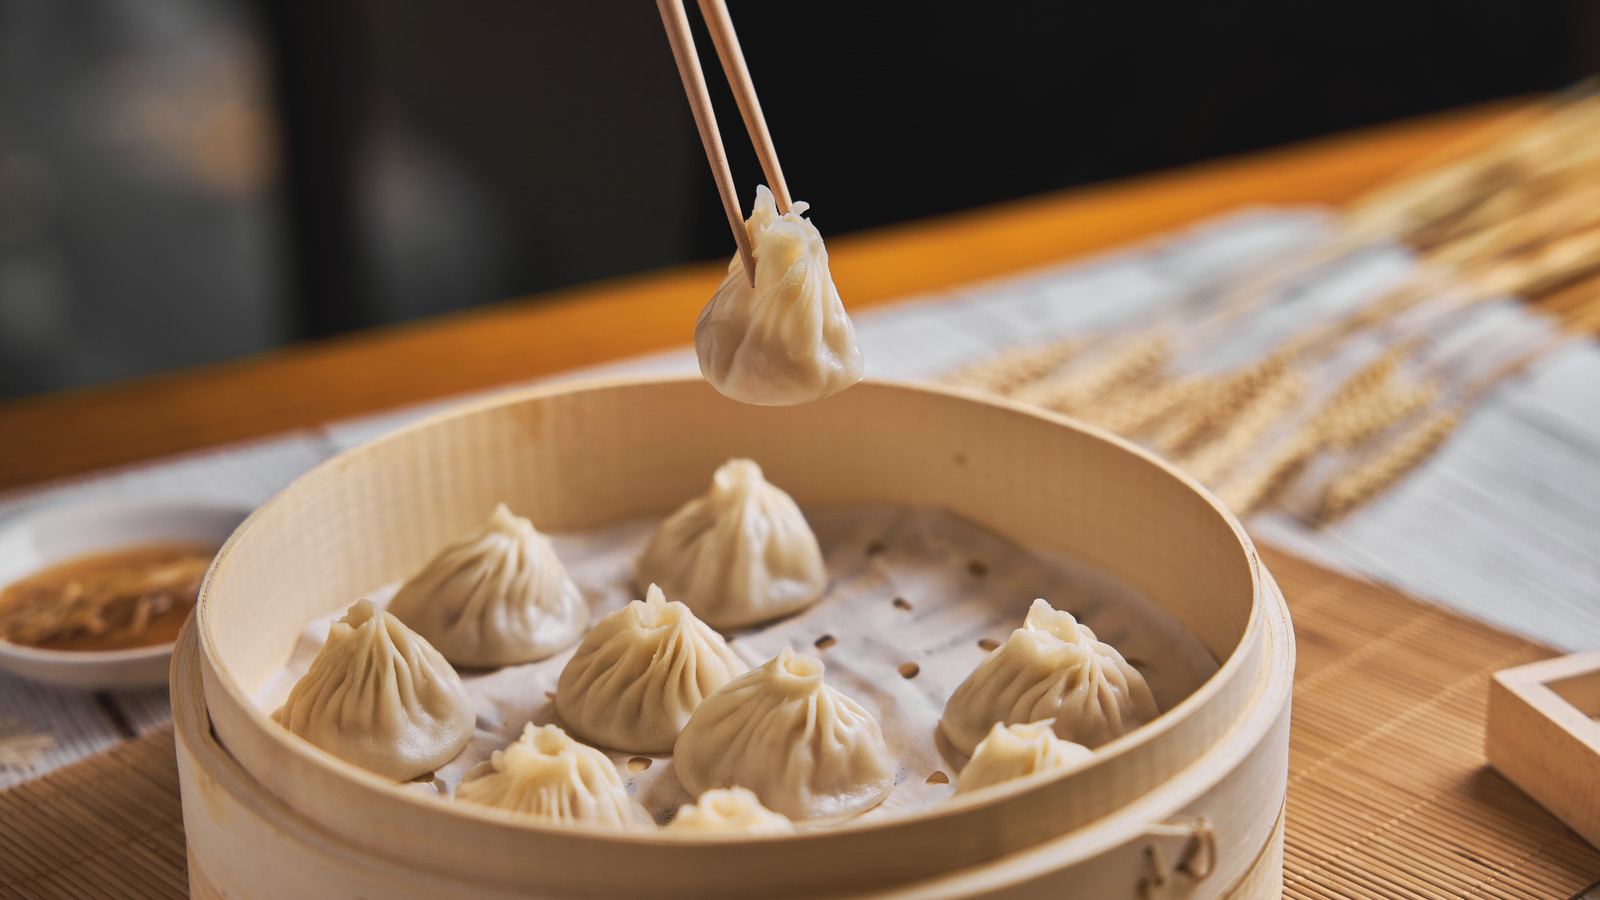 https://www.thedailymeal.com/img/gallery/how-to-elevate-the-texture-of-trader-joes-soup-dumplings/l-intro-1676986093.jpg